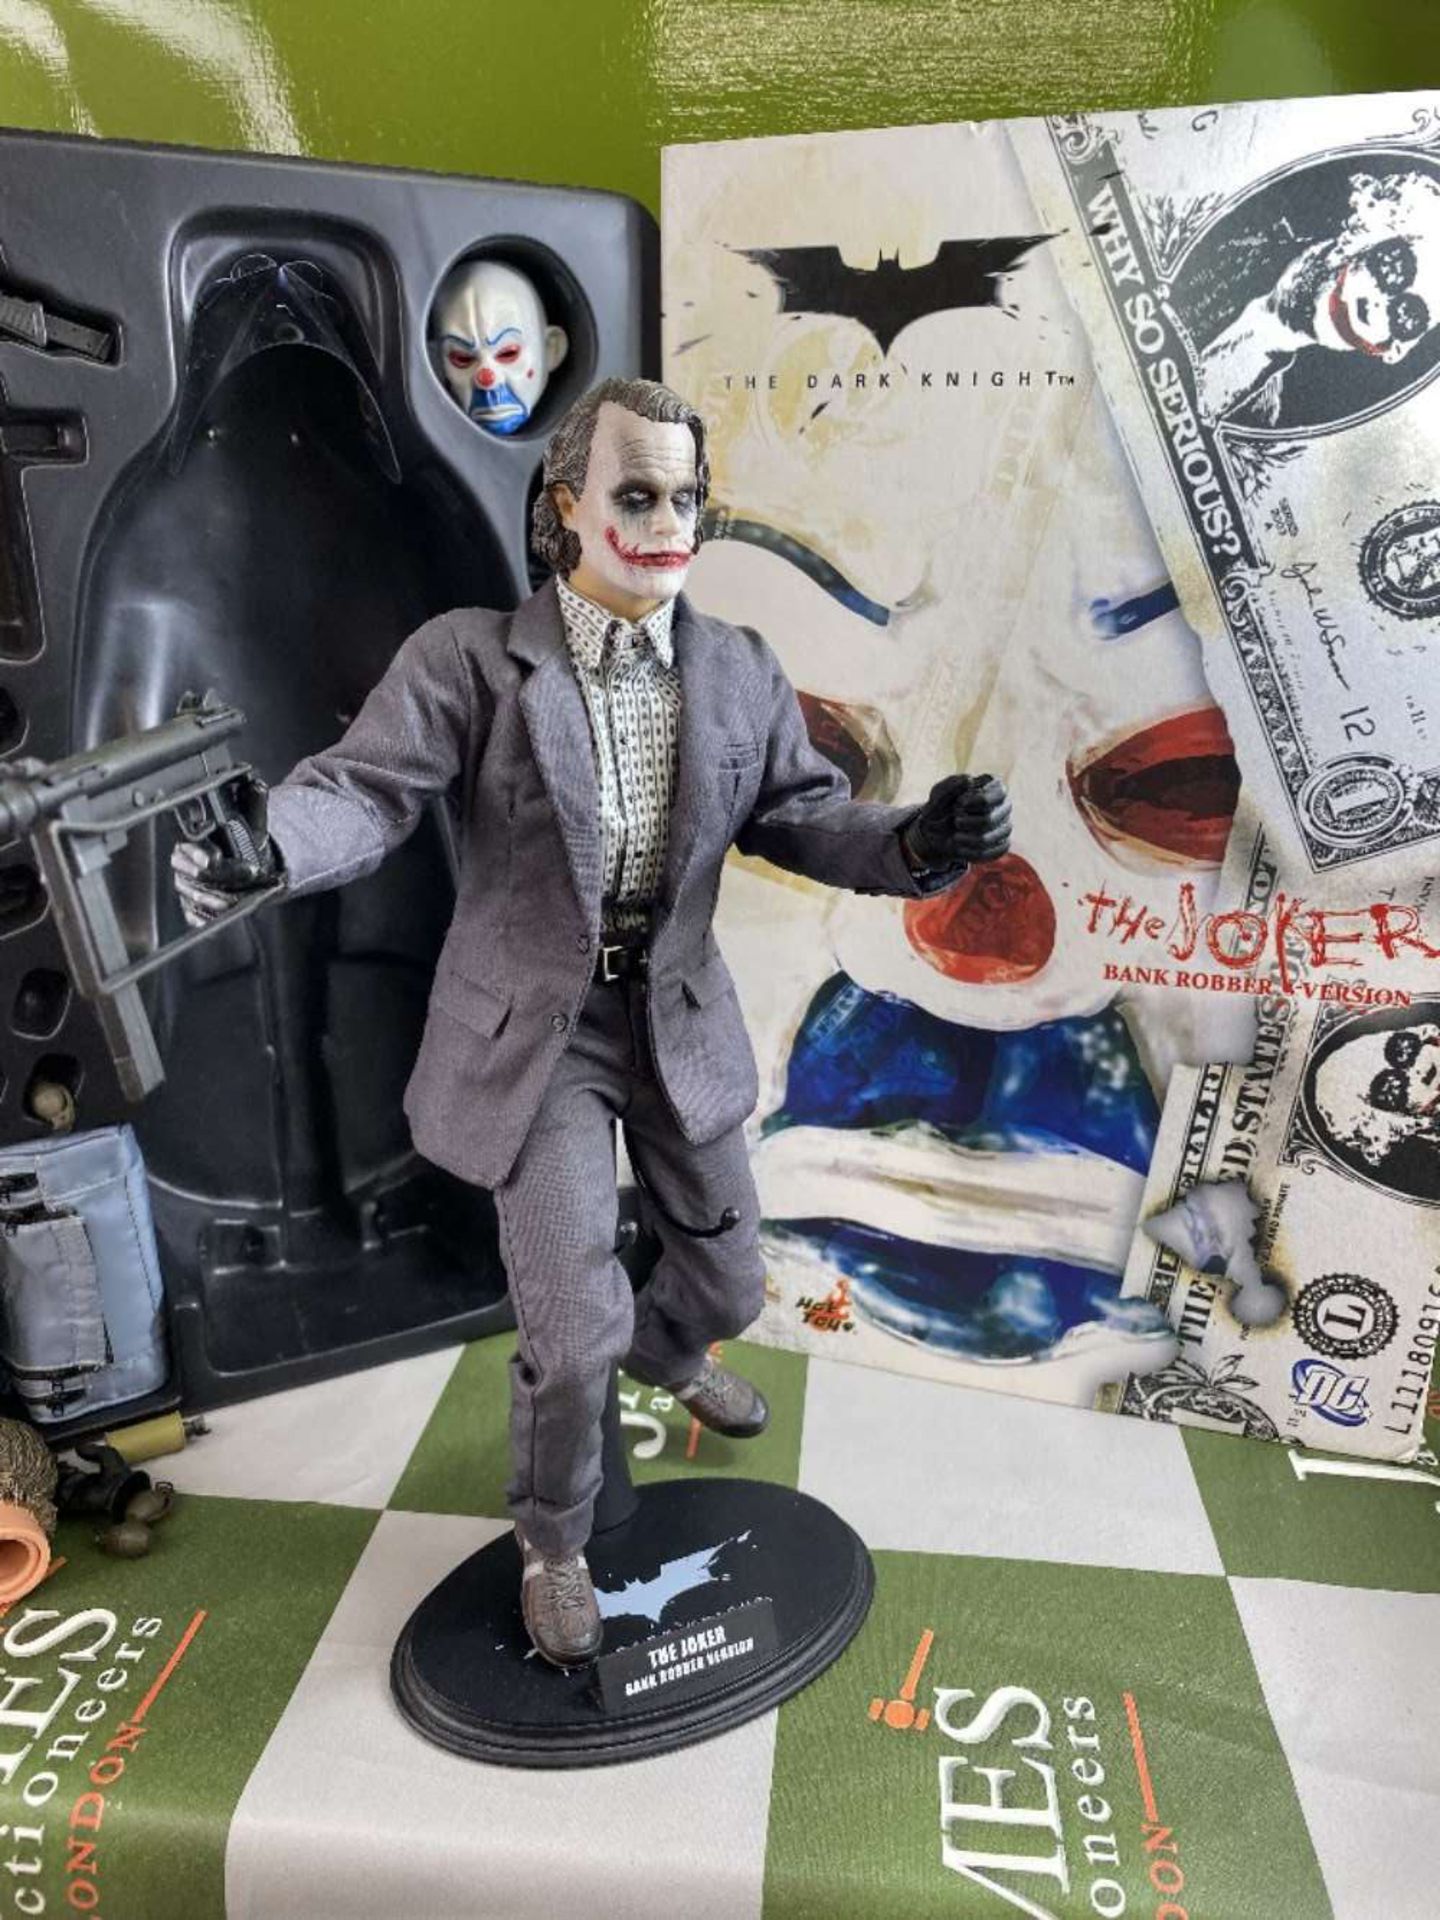 Hot Toys "The Joker" Bank Robber Edition 1/6 Scale Figure - Image 6 of 6